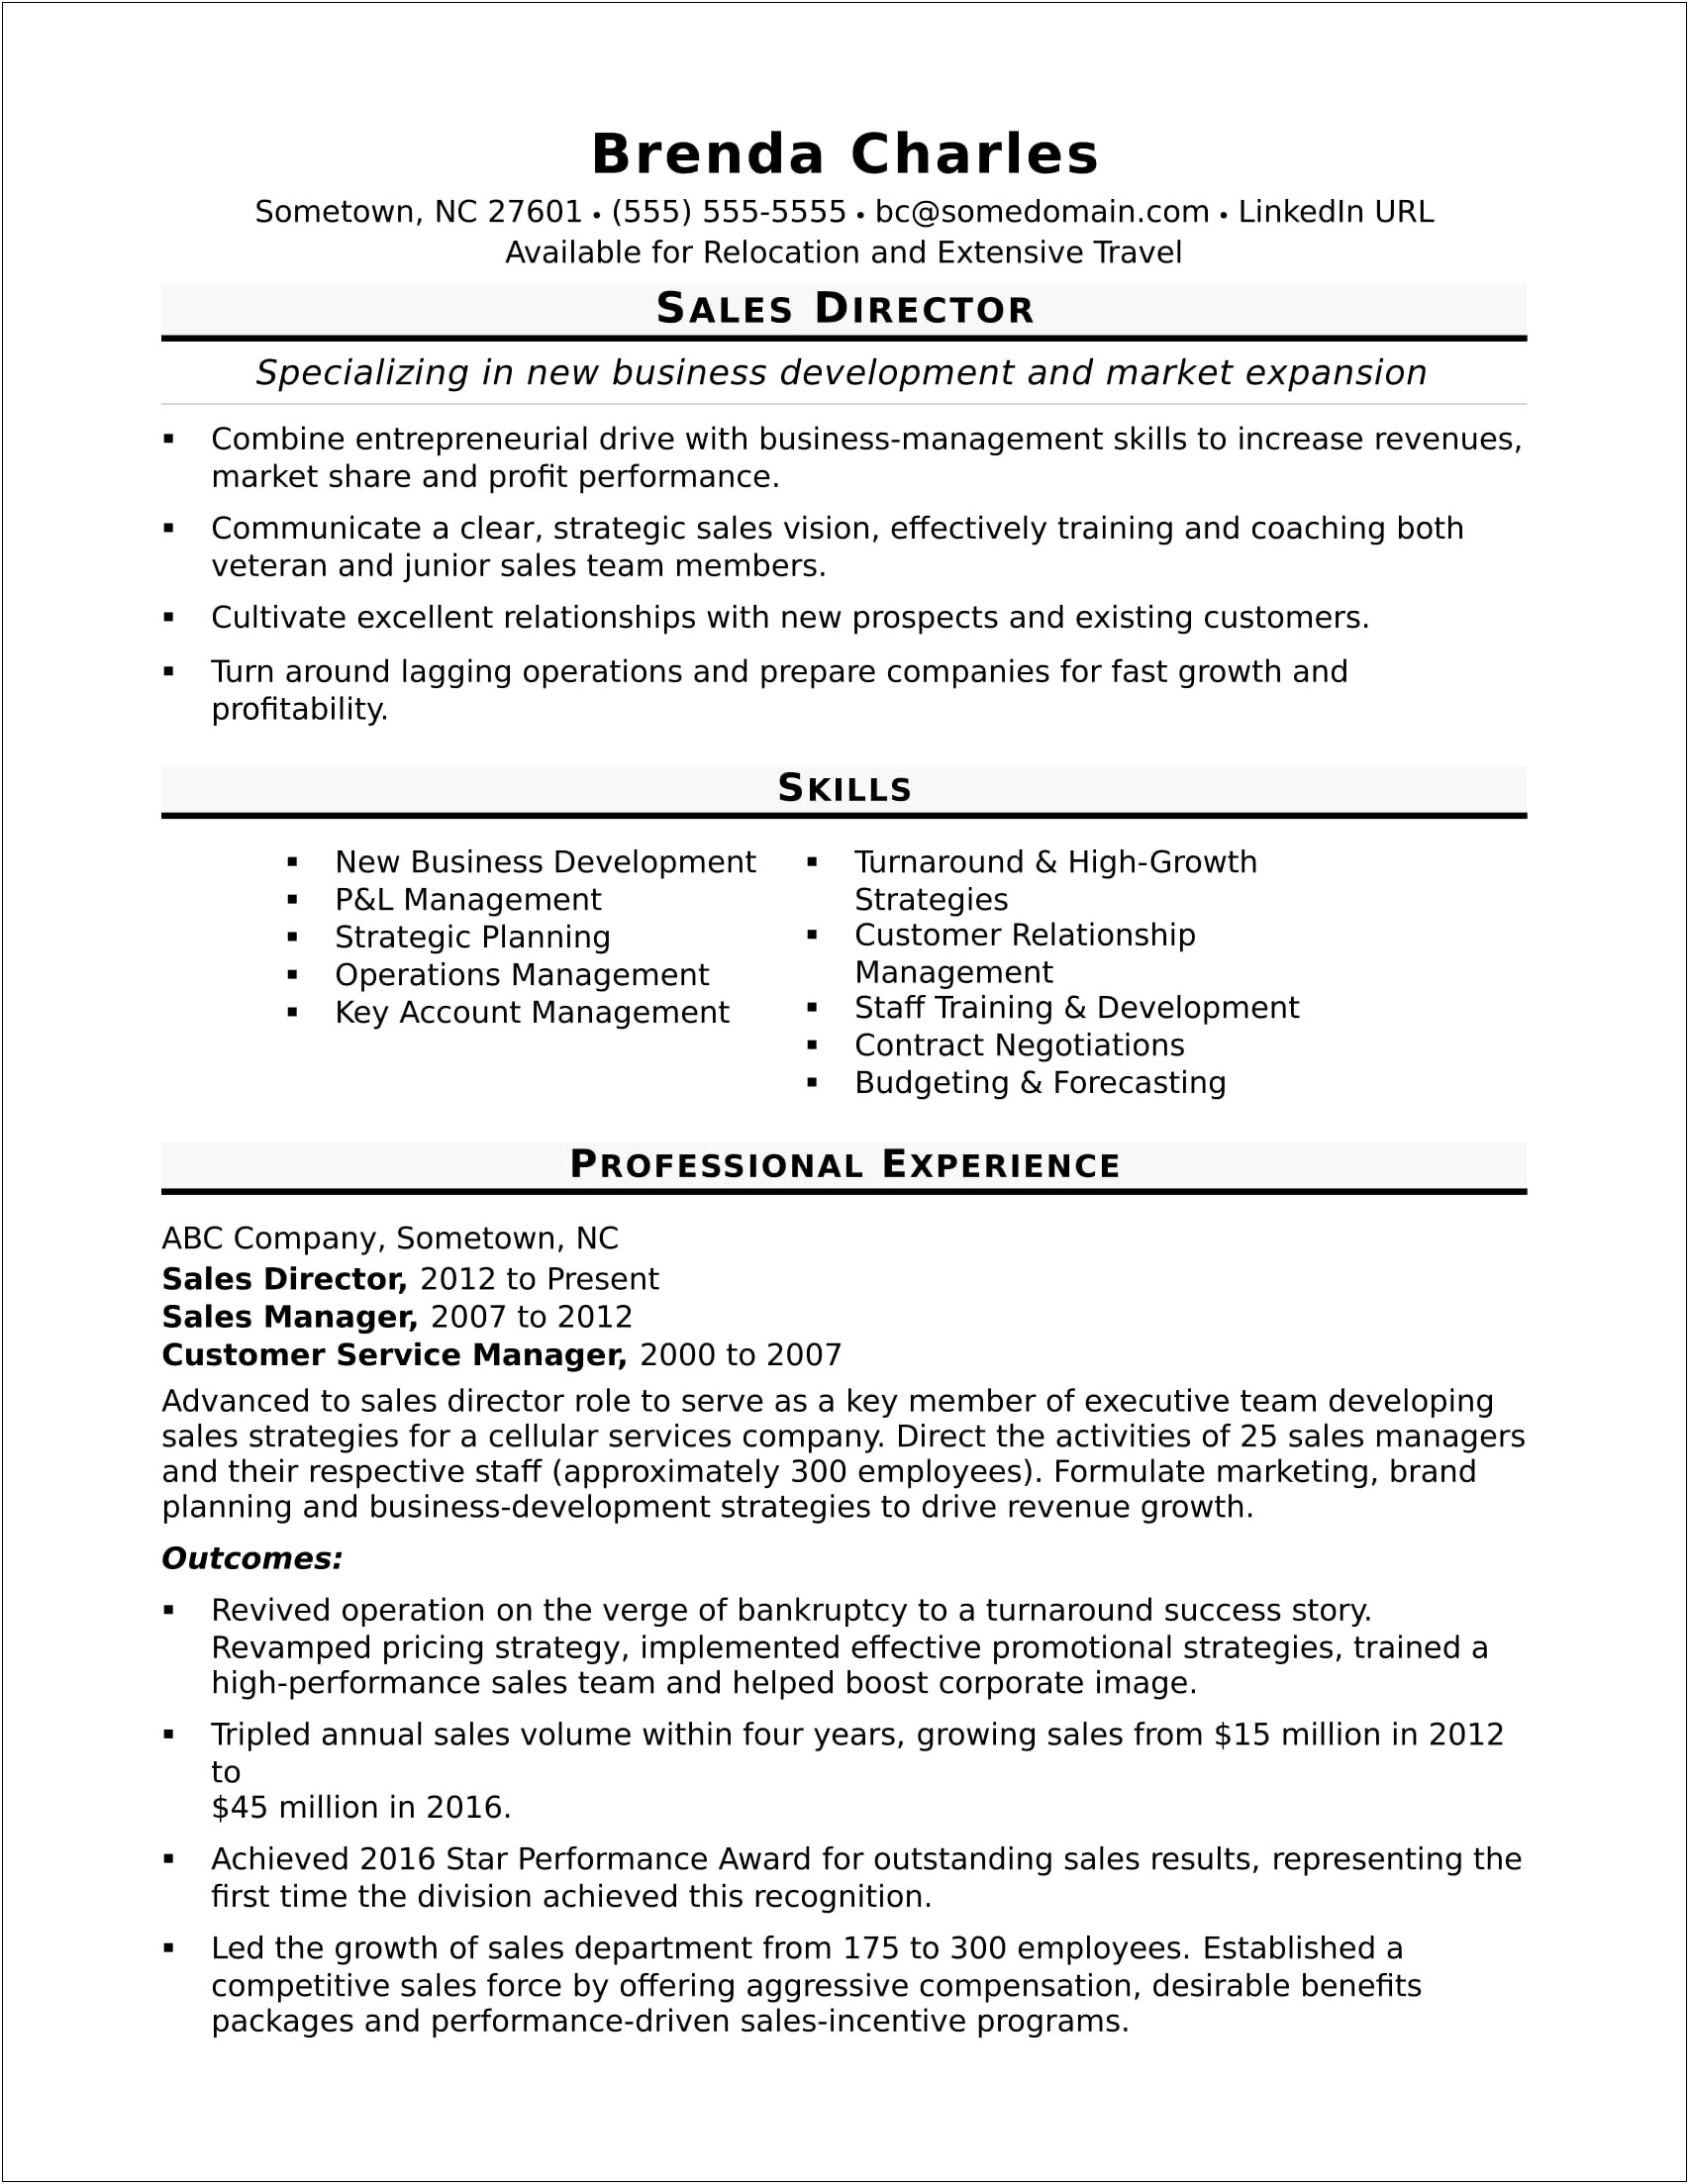 Sample Resume For Sales Training Manager